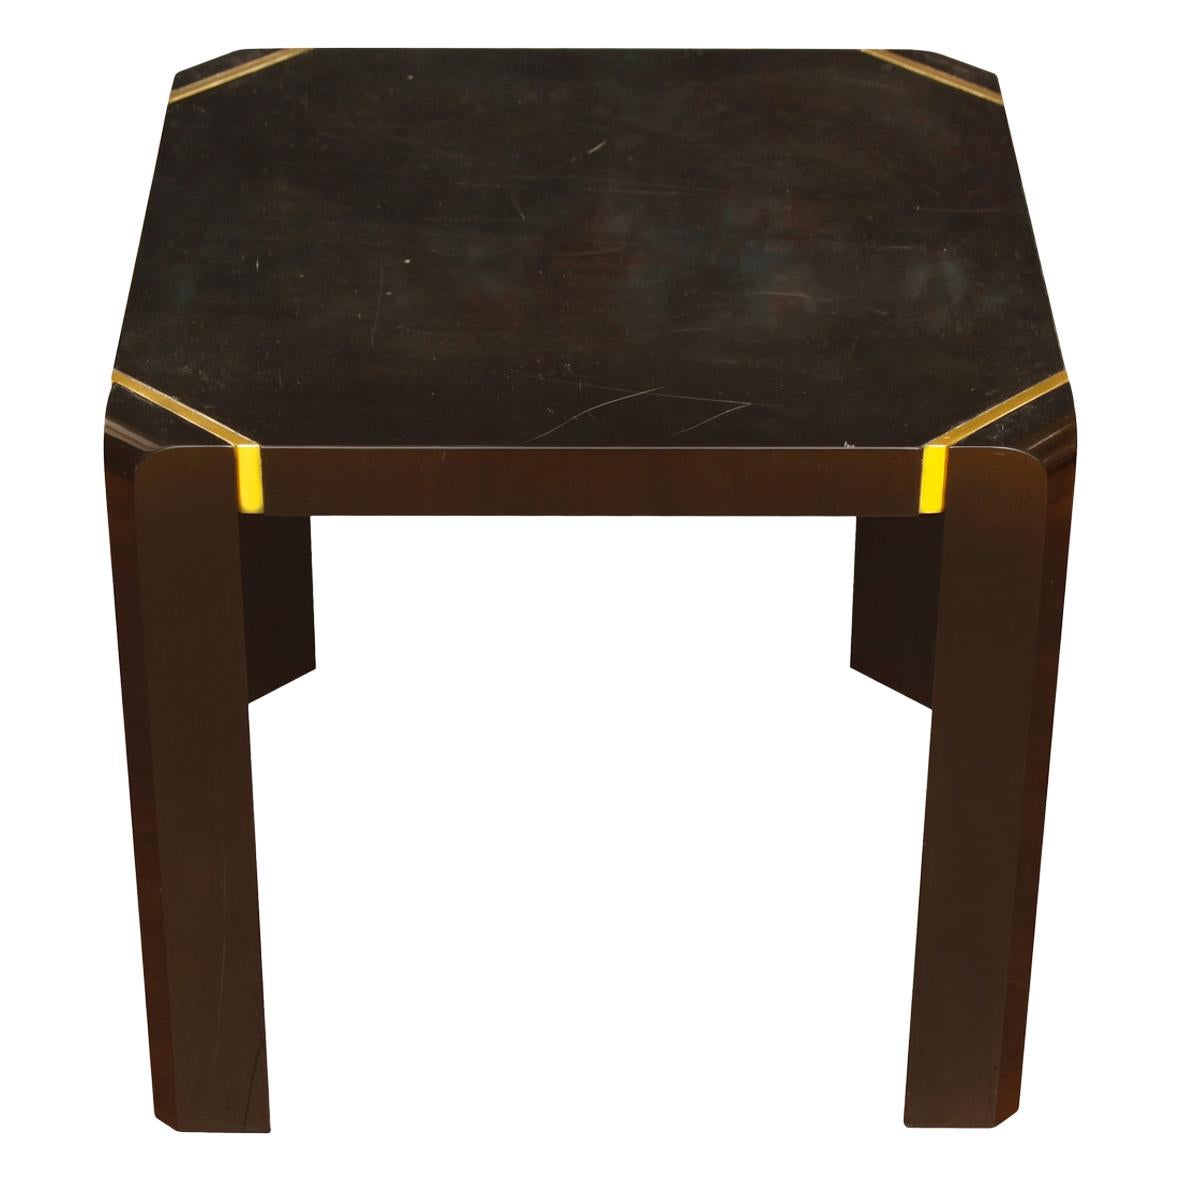 Pair of Modern Black Lacquer Side Tables with Brass Details